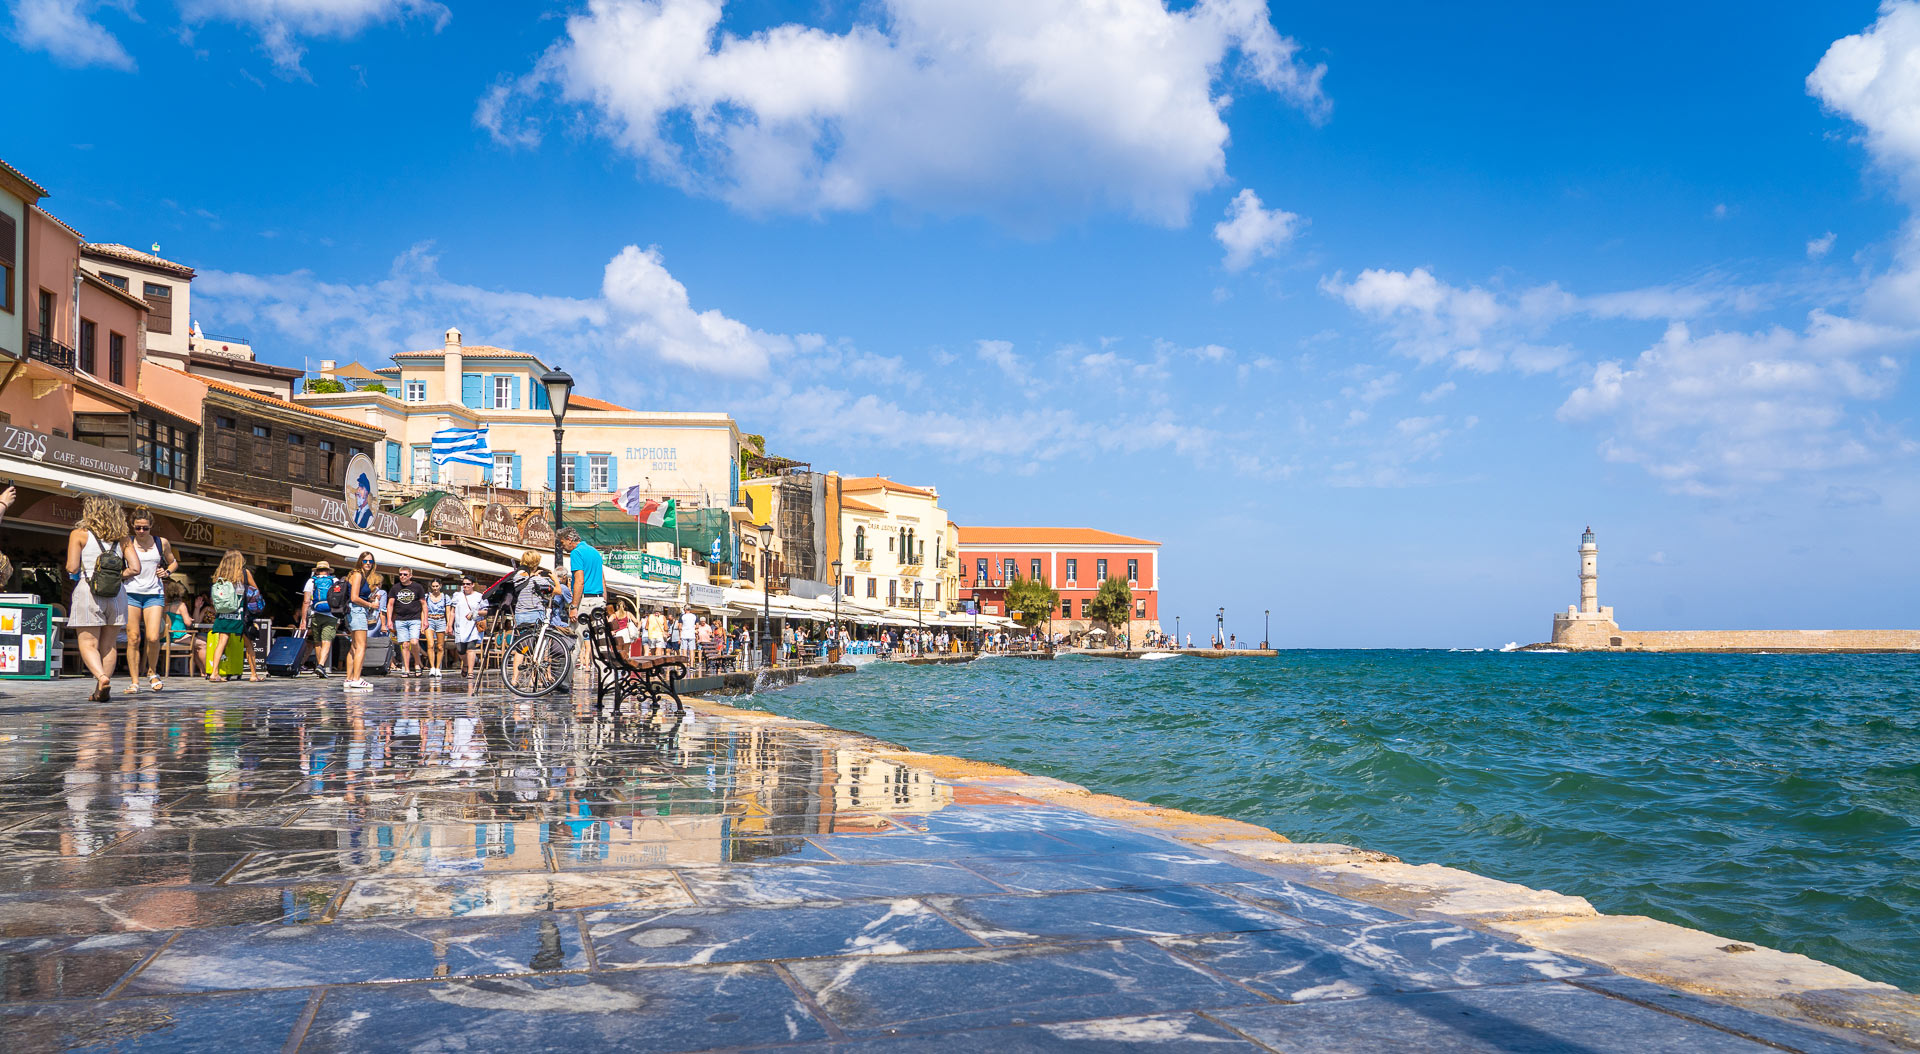 The old Venetian port of Chania – A week in Crete itinerary